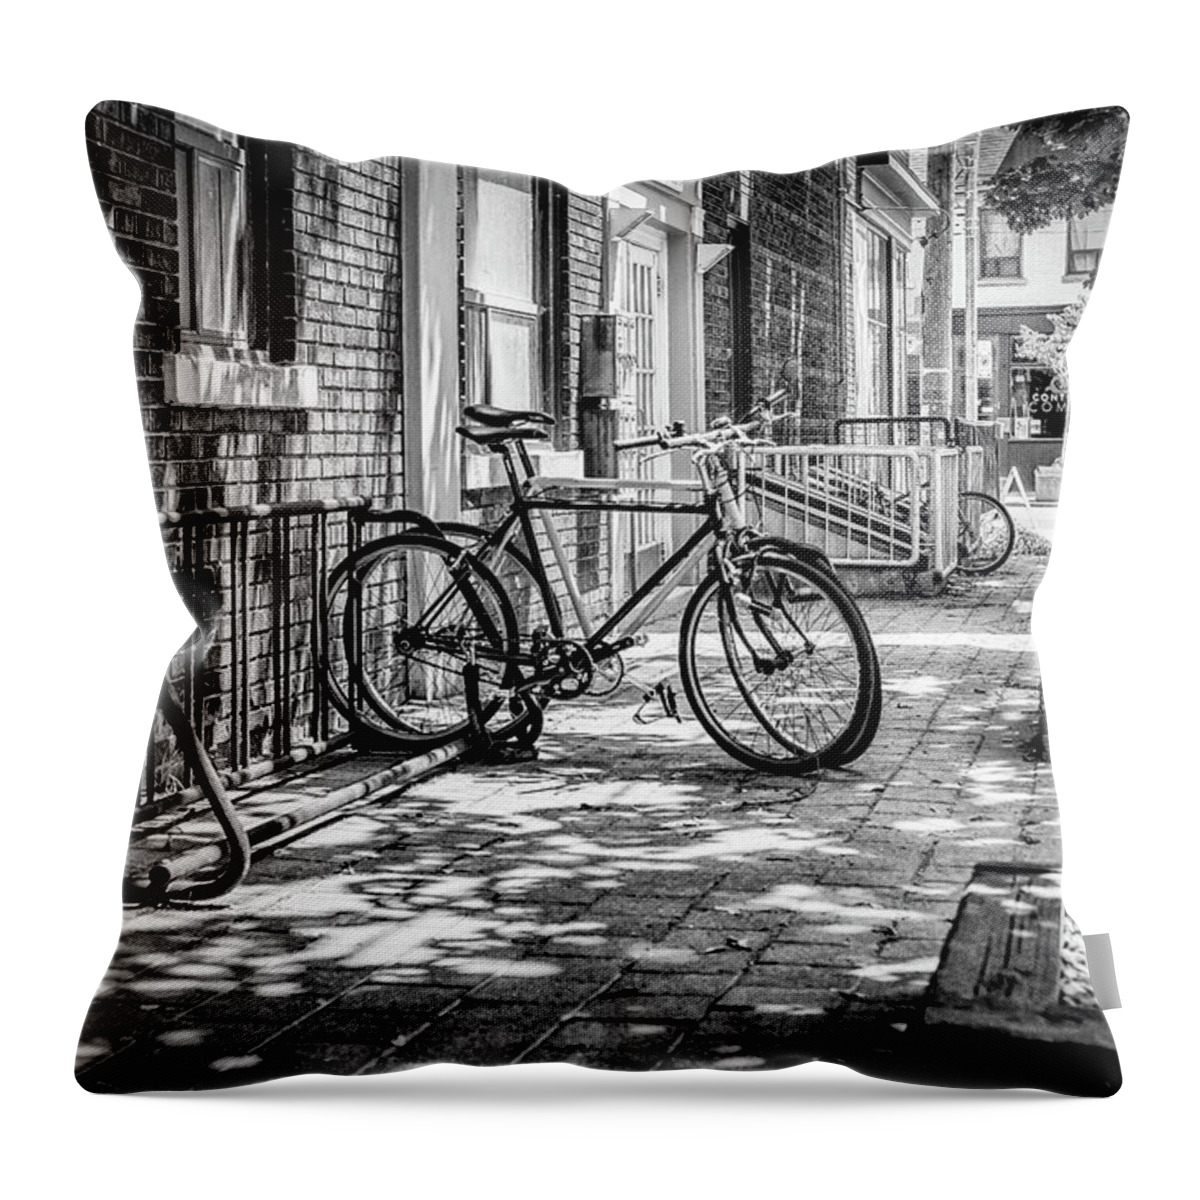 Toronto Throw Pillow featuring the photograph Leslieville by Images By Toronto Photographer Robert Greatrix